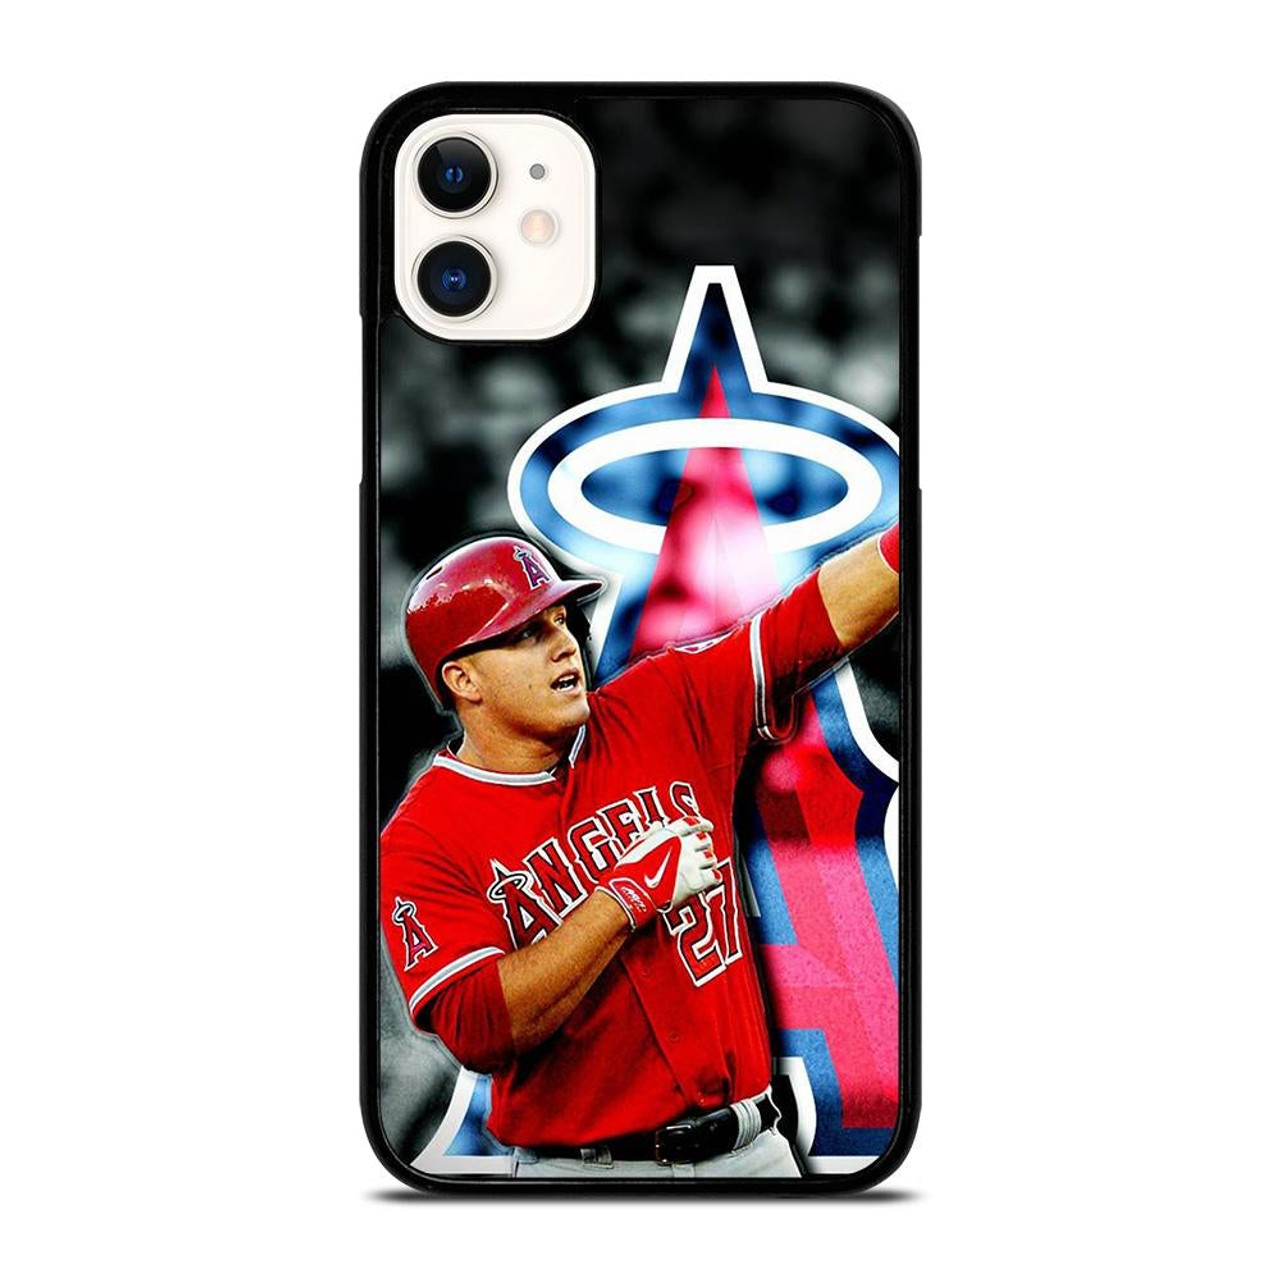 MIKE TROUT BASEBALL iPhone 11 Case Cover